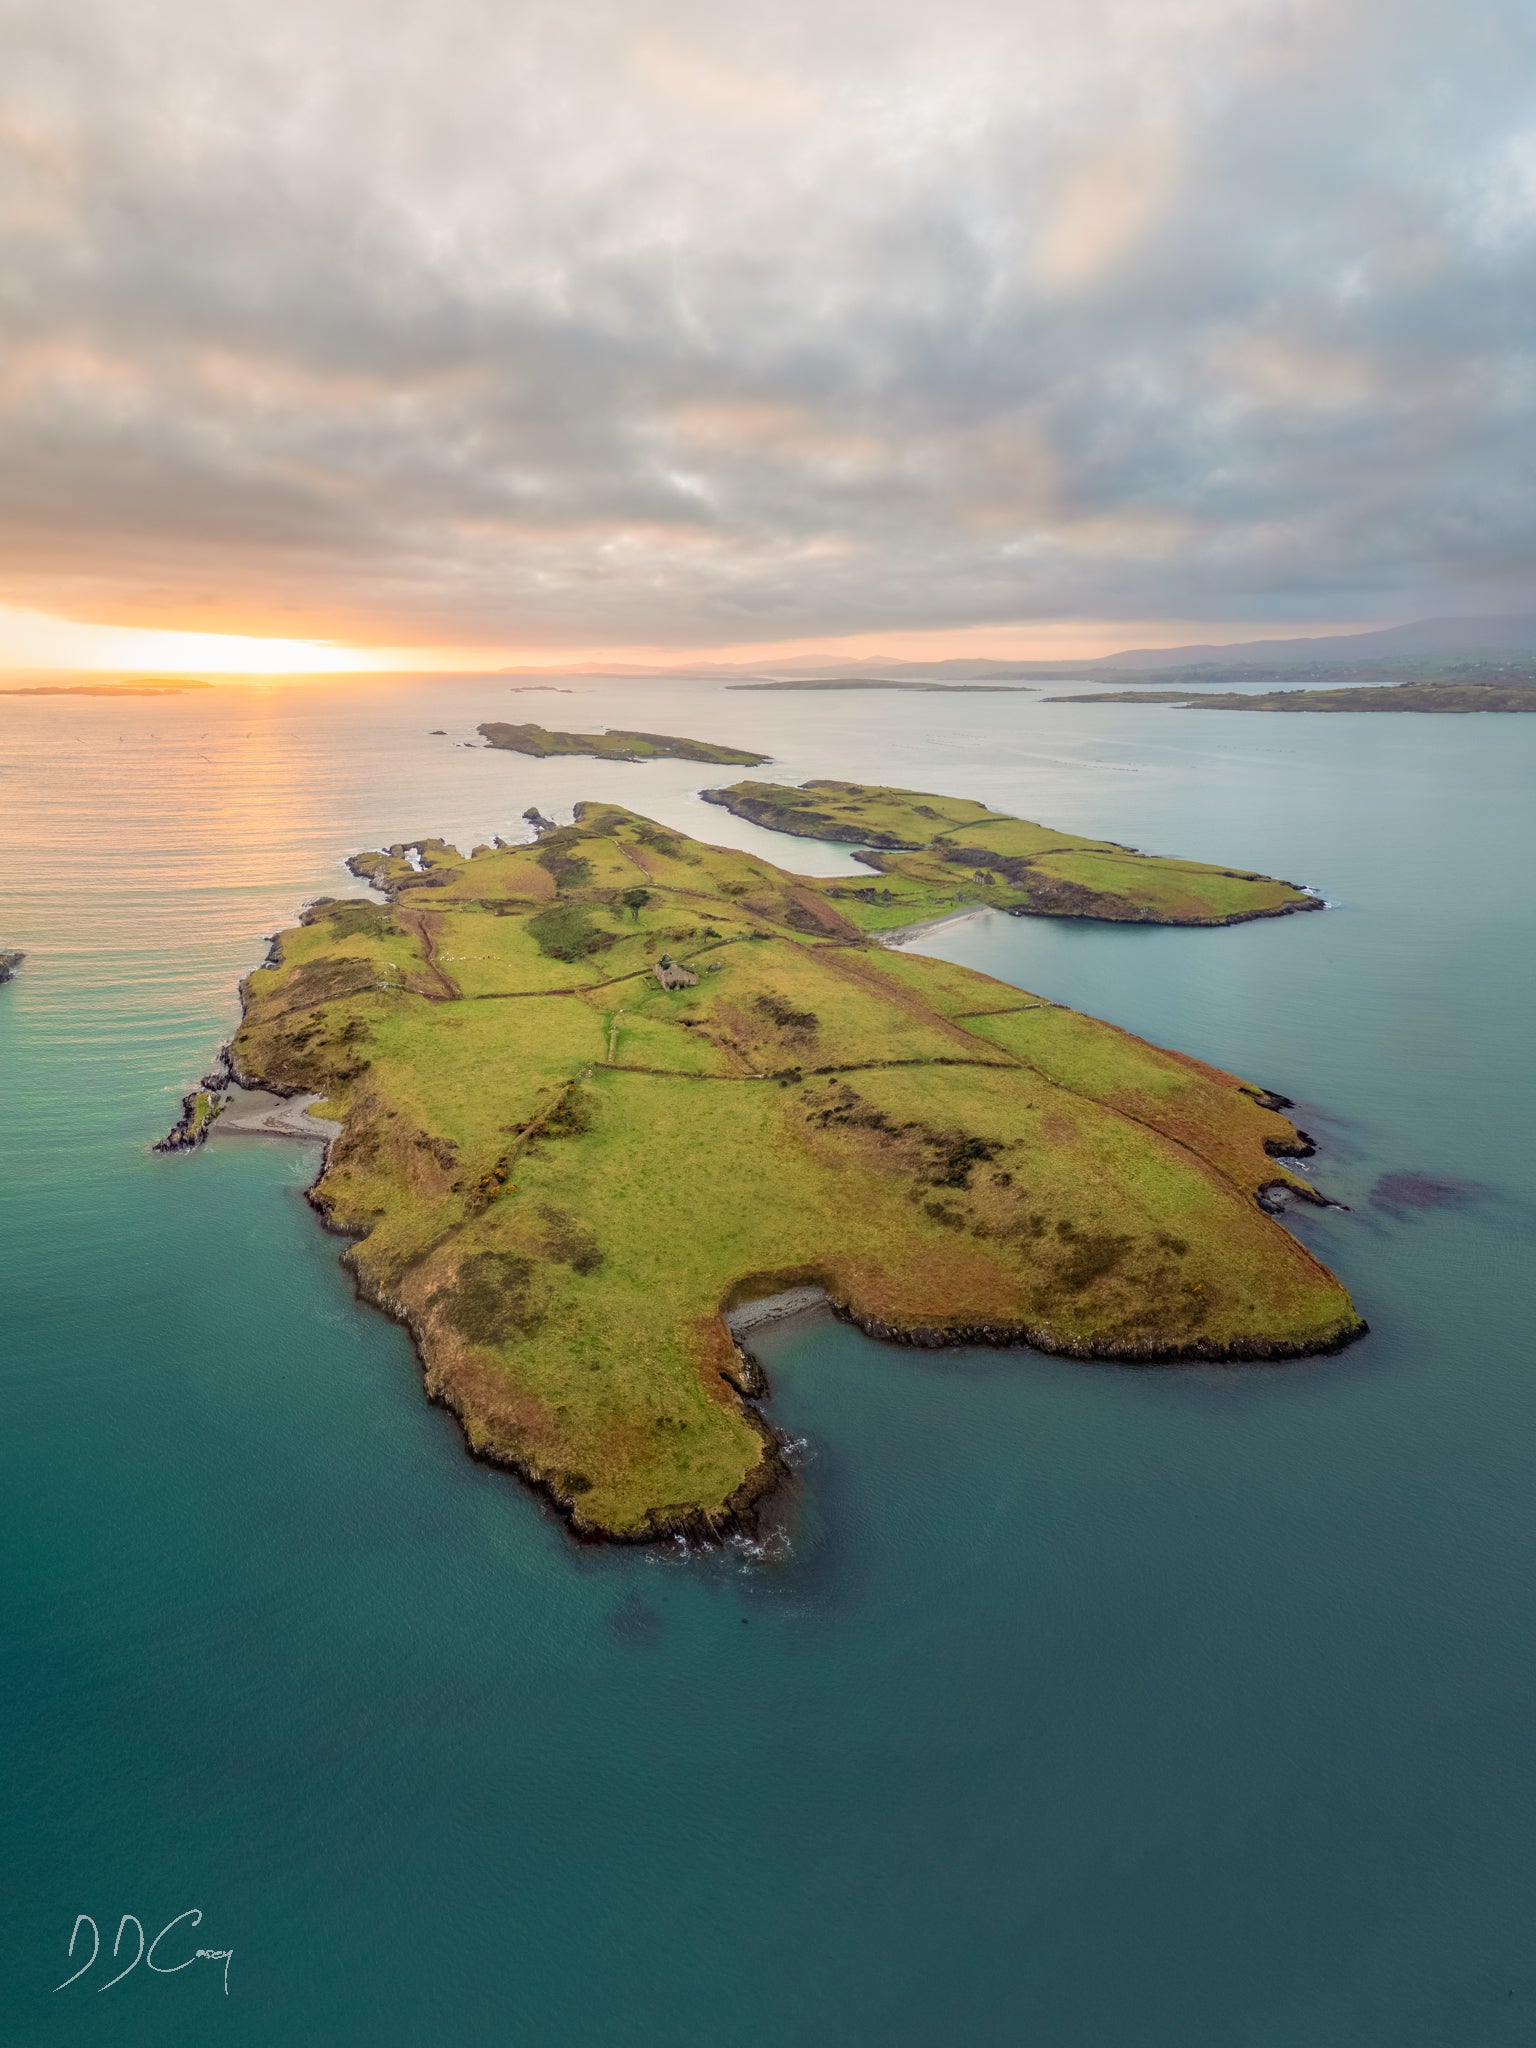 A sunset photo of Eastern Skeam Island in Ireland's Roaring Water Bay, with the outline of West Skeam Island and Brow Head in the distance. The island is surrounded by calm waters and the golden hour lighting adds warmth to the scene. The photo is a beautiful representation of the natural beauty of Ireland and a glimpse into its rich history.